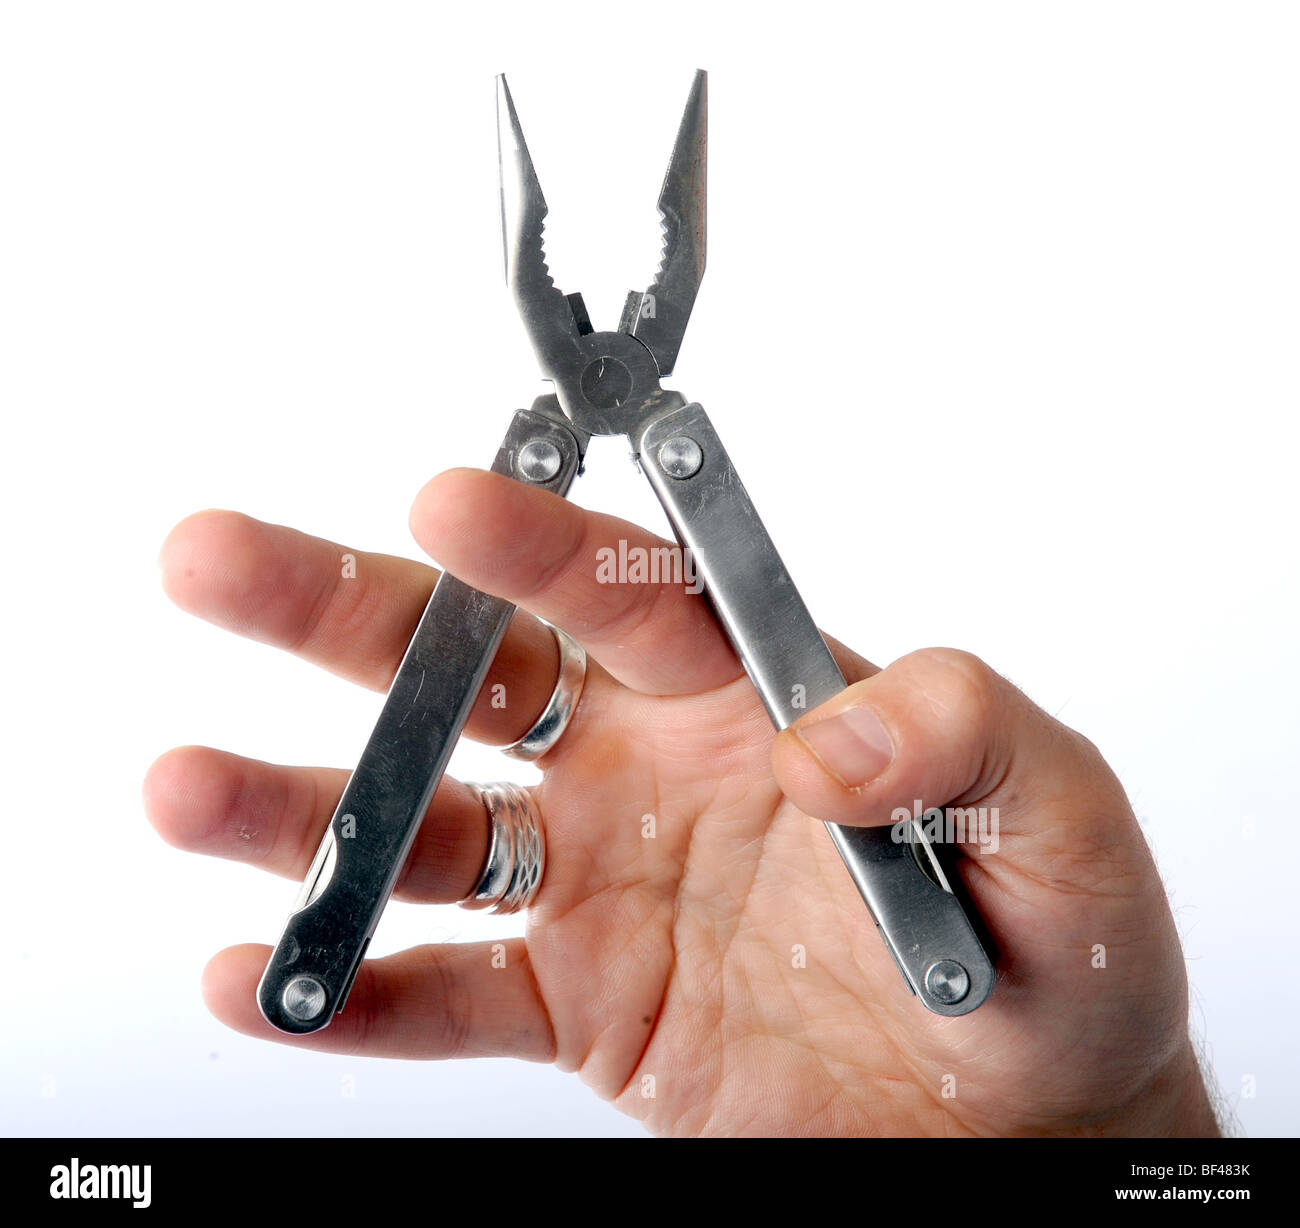 Rolson leatherman style retractable toolkit including knives pliers and screwdriver Stock Photo